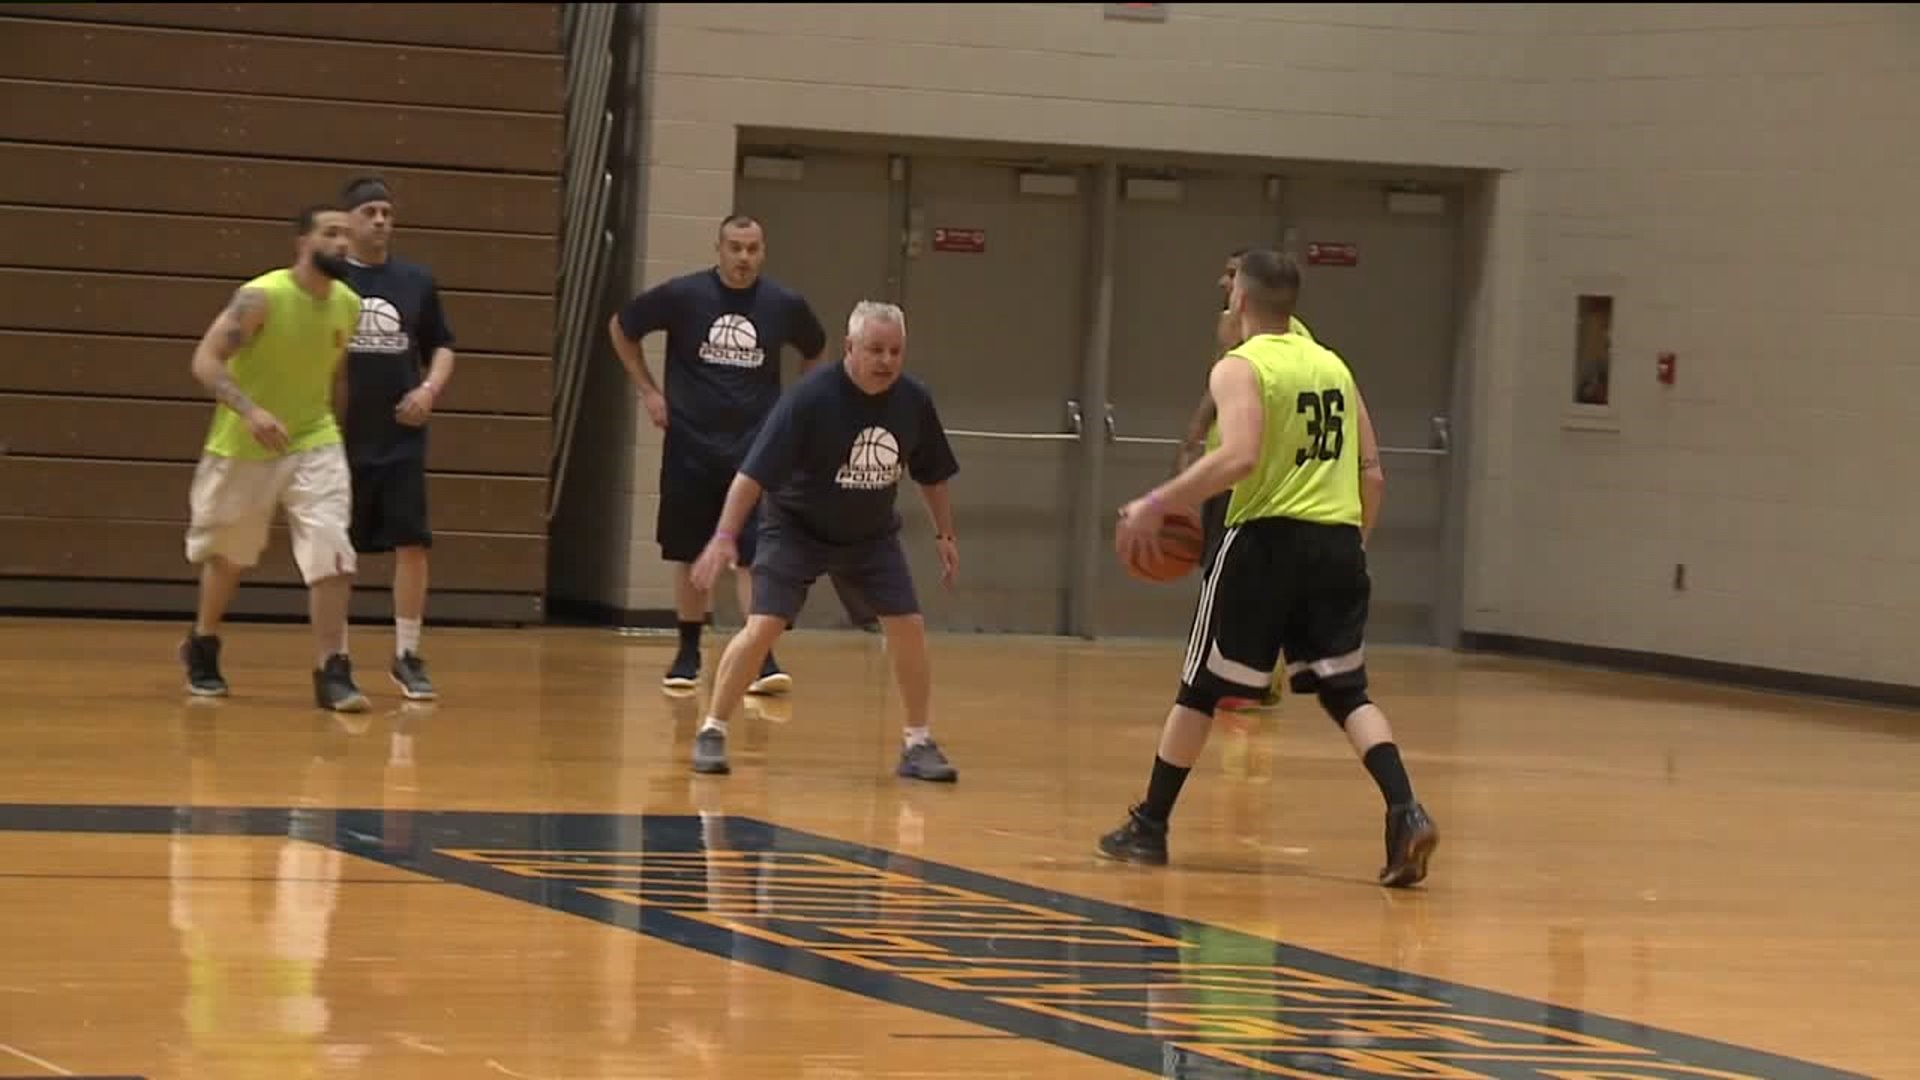 Basketball Tournament Aims to Help Fight Addiction